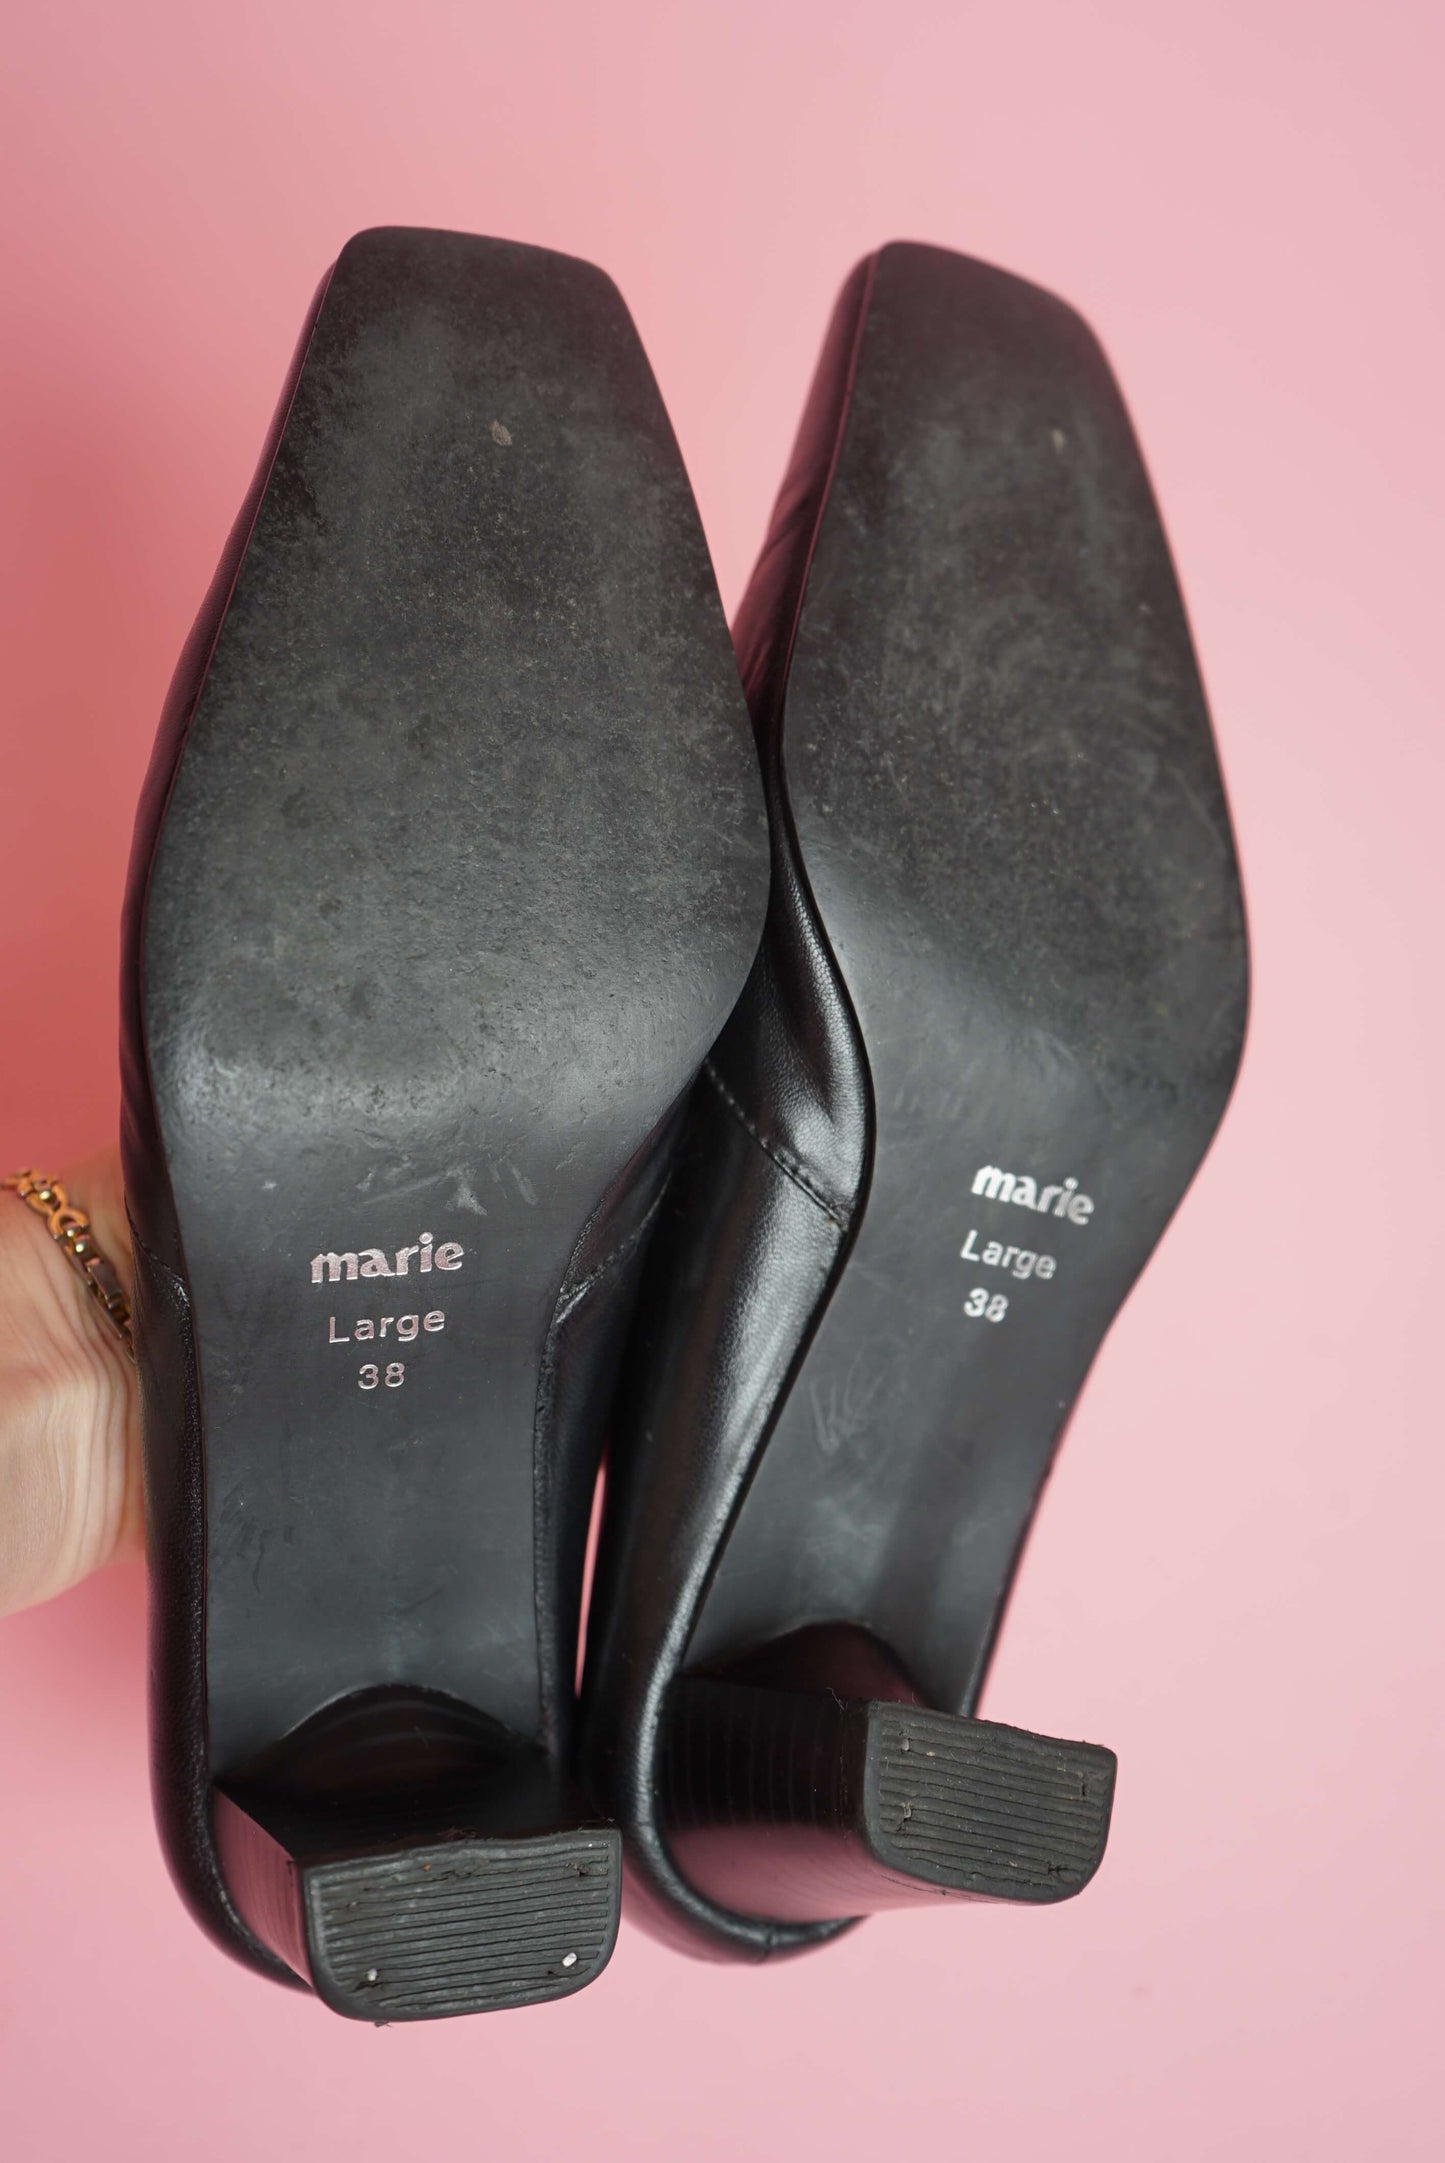 Vintage Black Court Shoes With Elastic Strap Detail On Top Square Toe Size 5-5.5/38-38.5